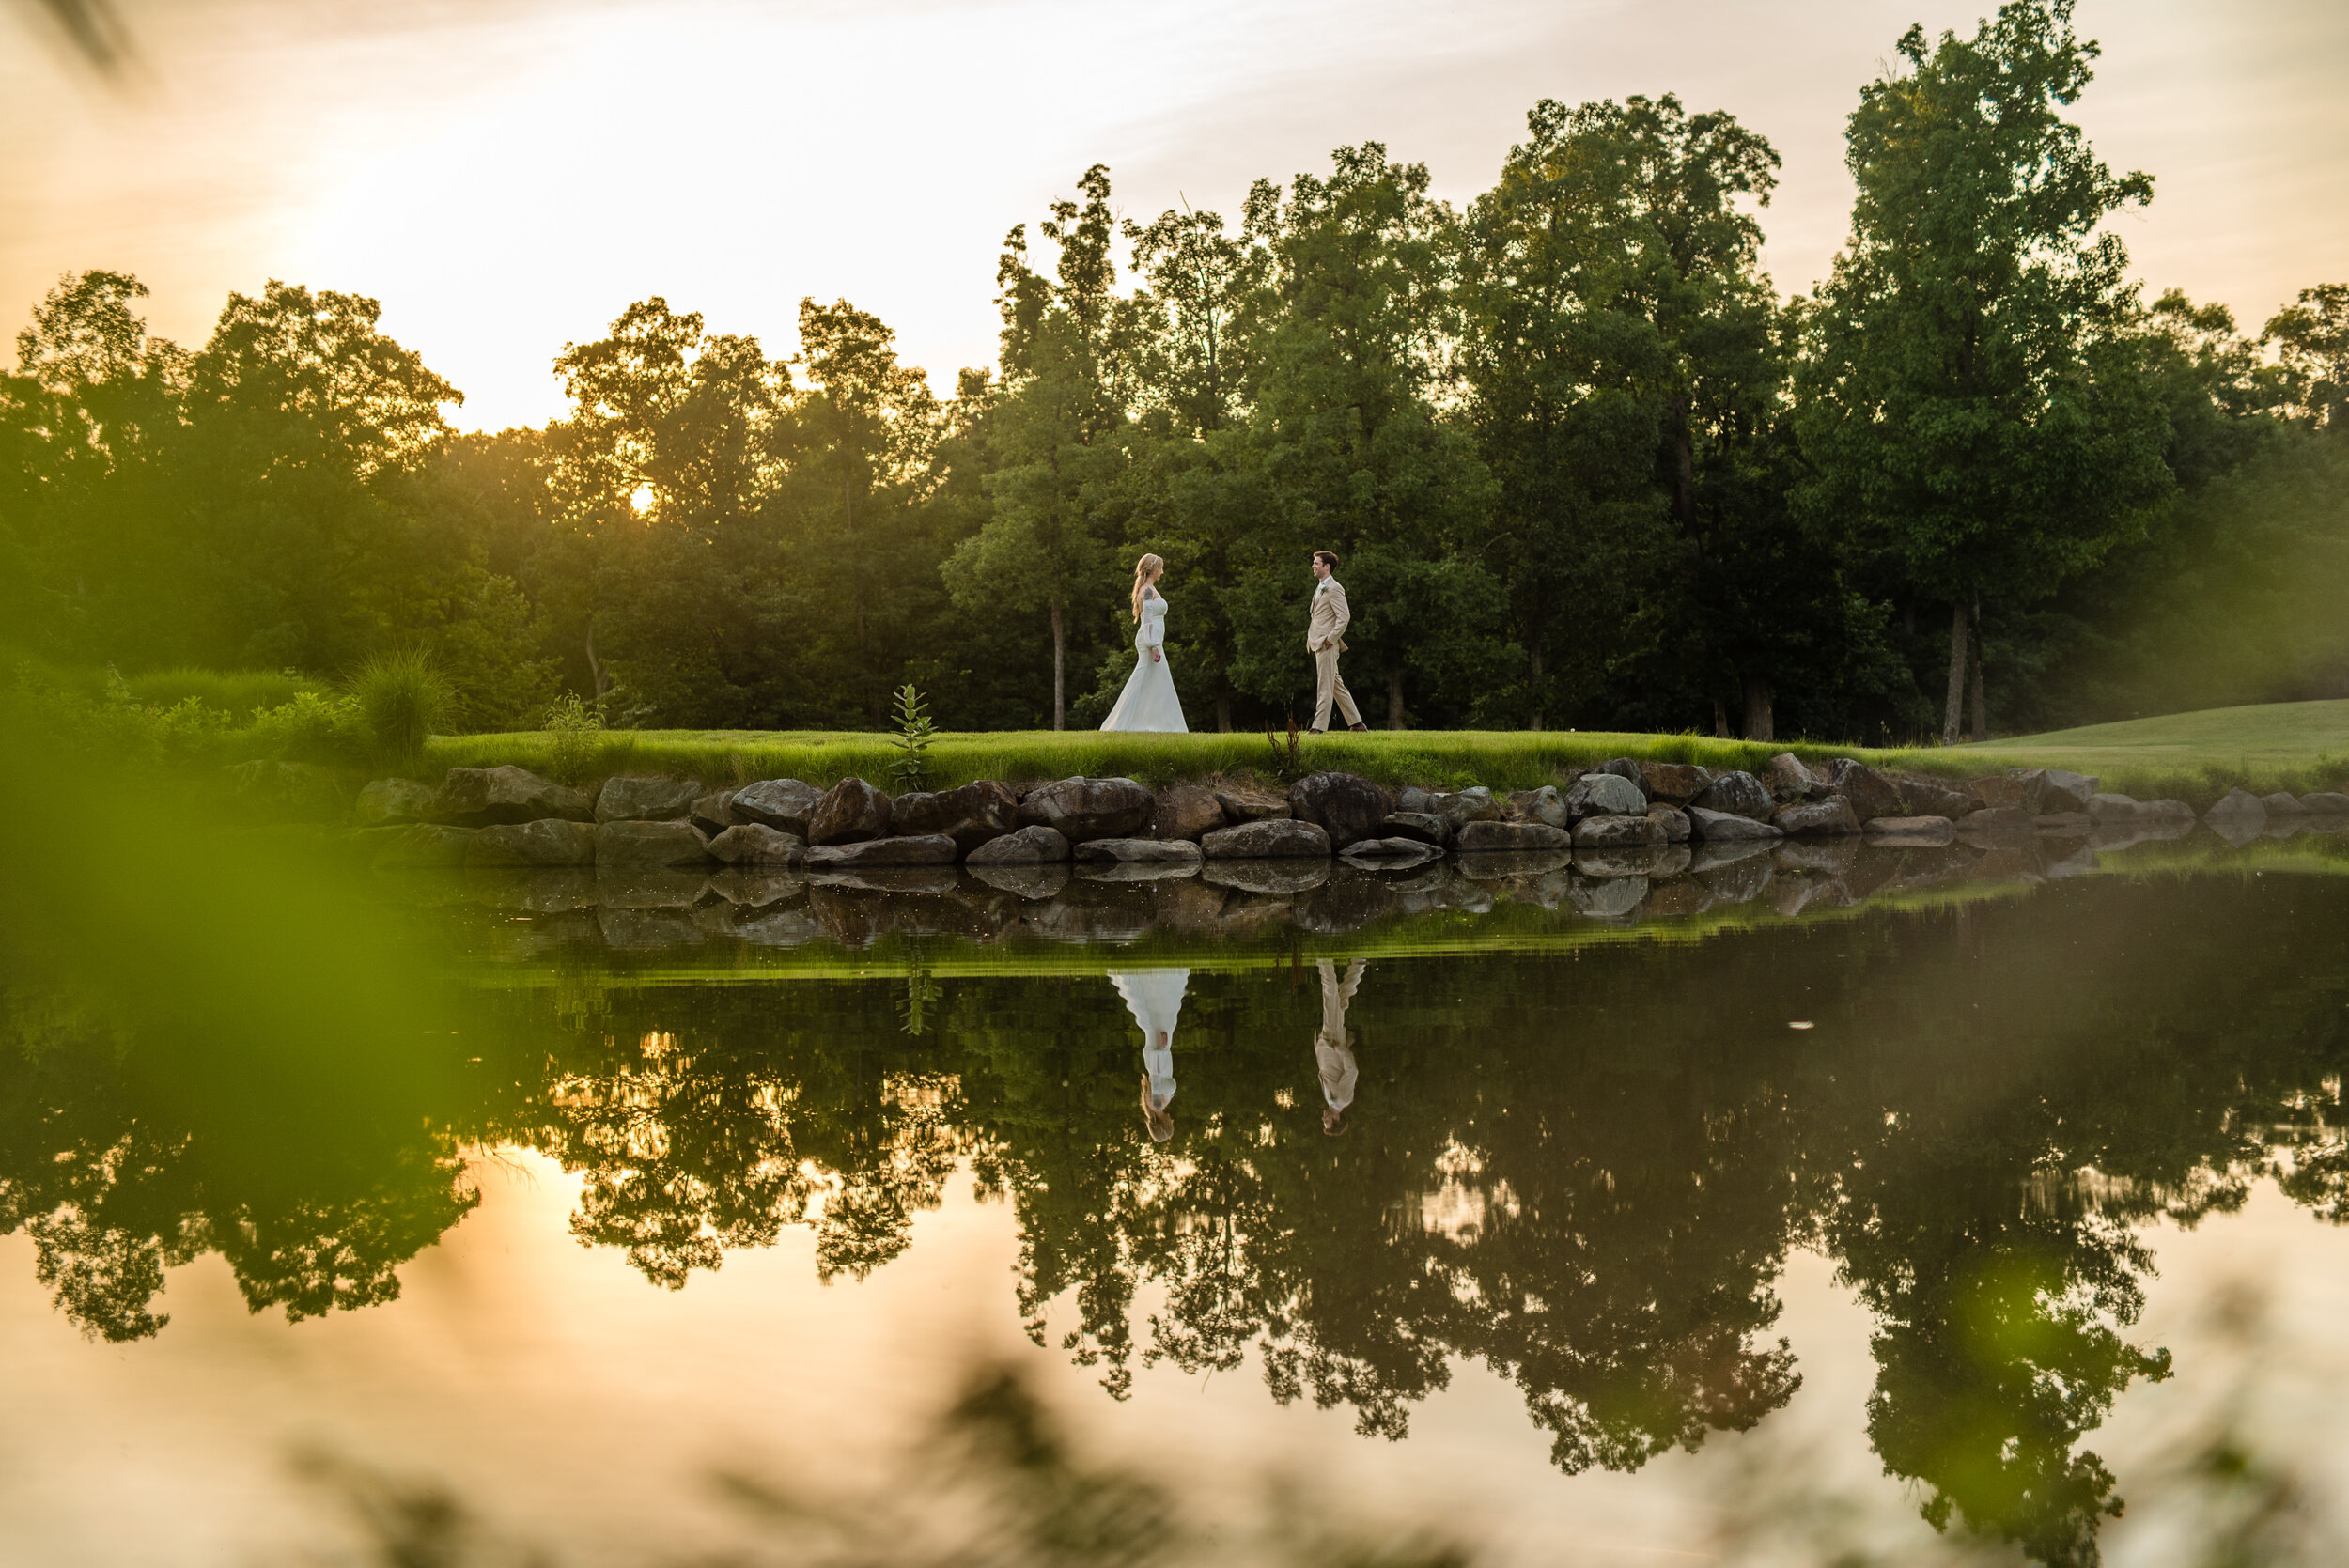 A bride and groom walking towards each other at golden hour  reflected in the pond